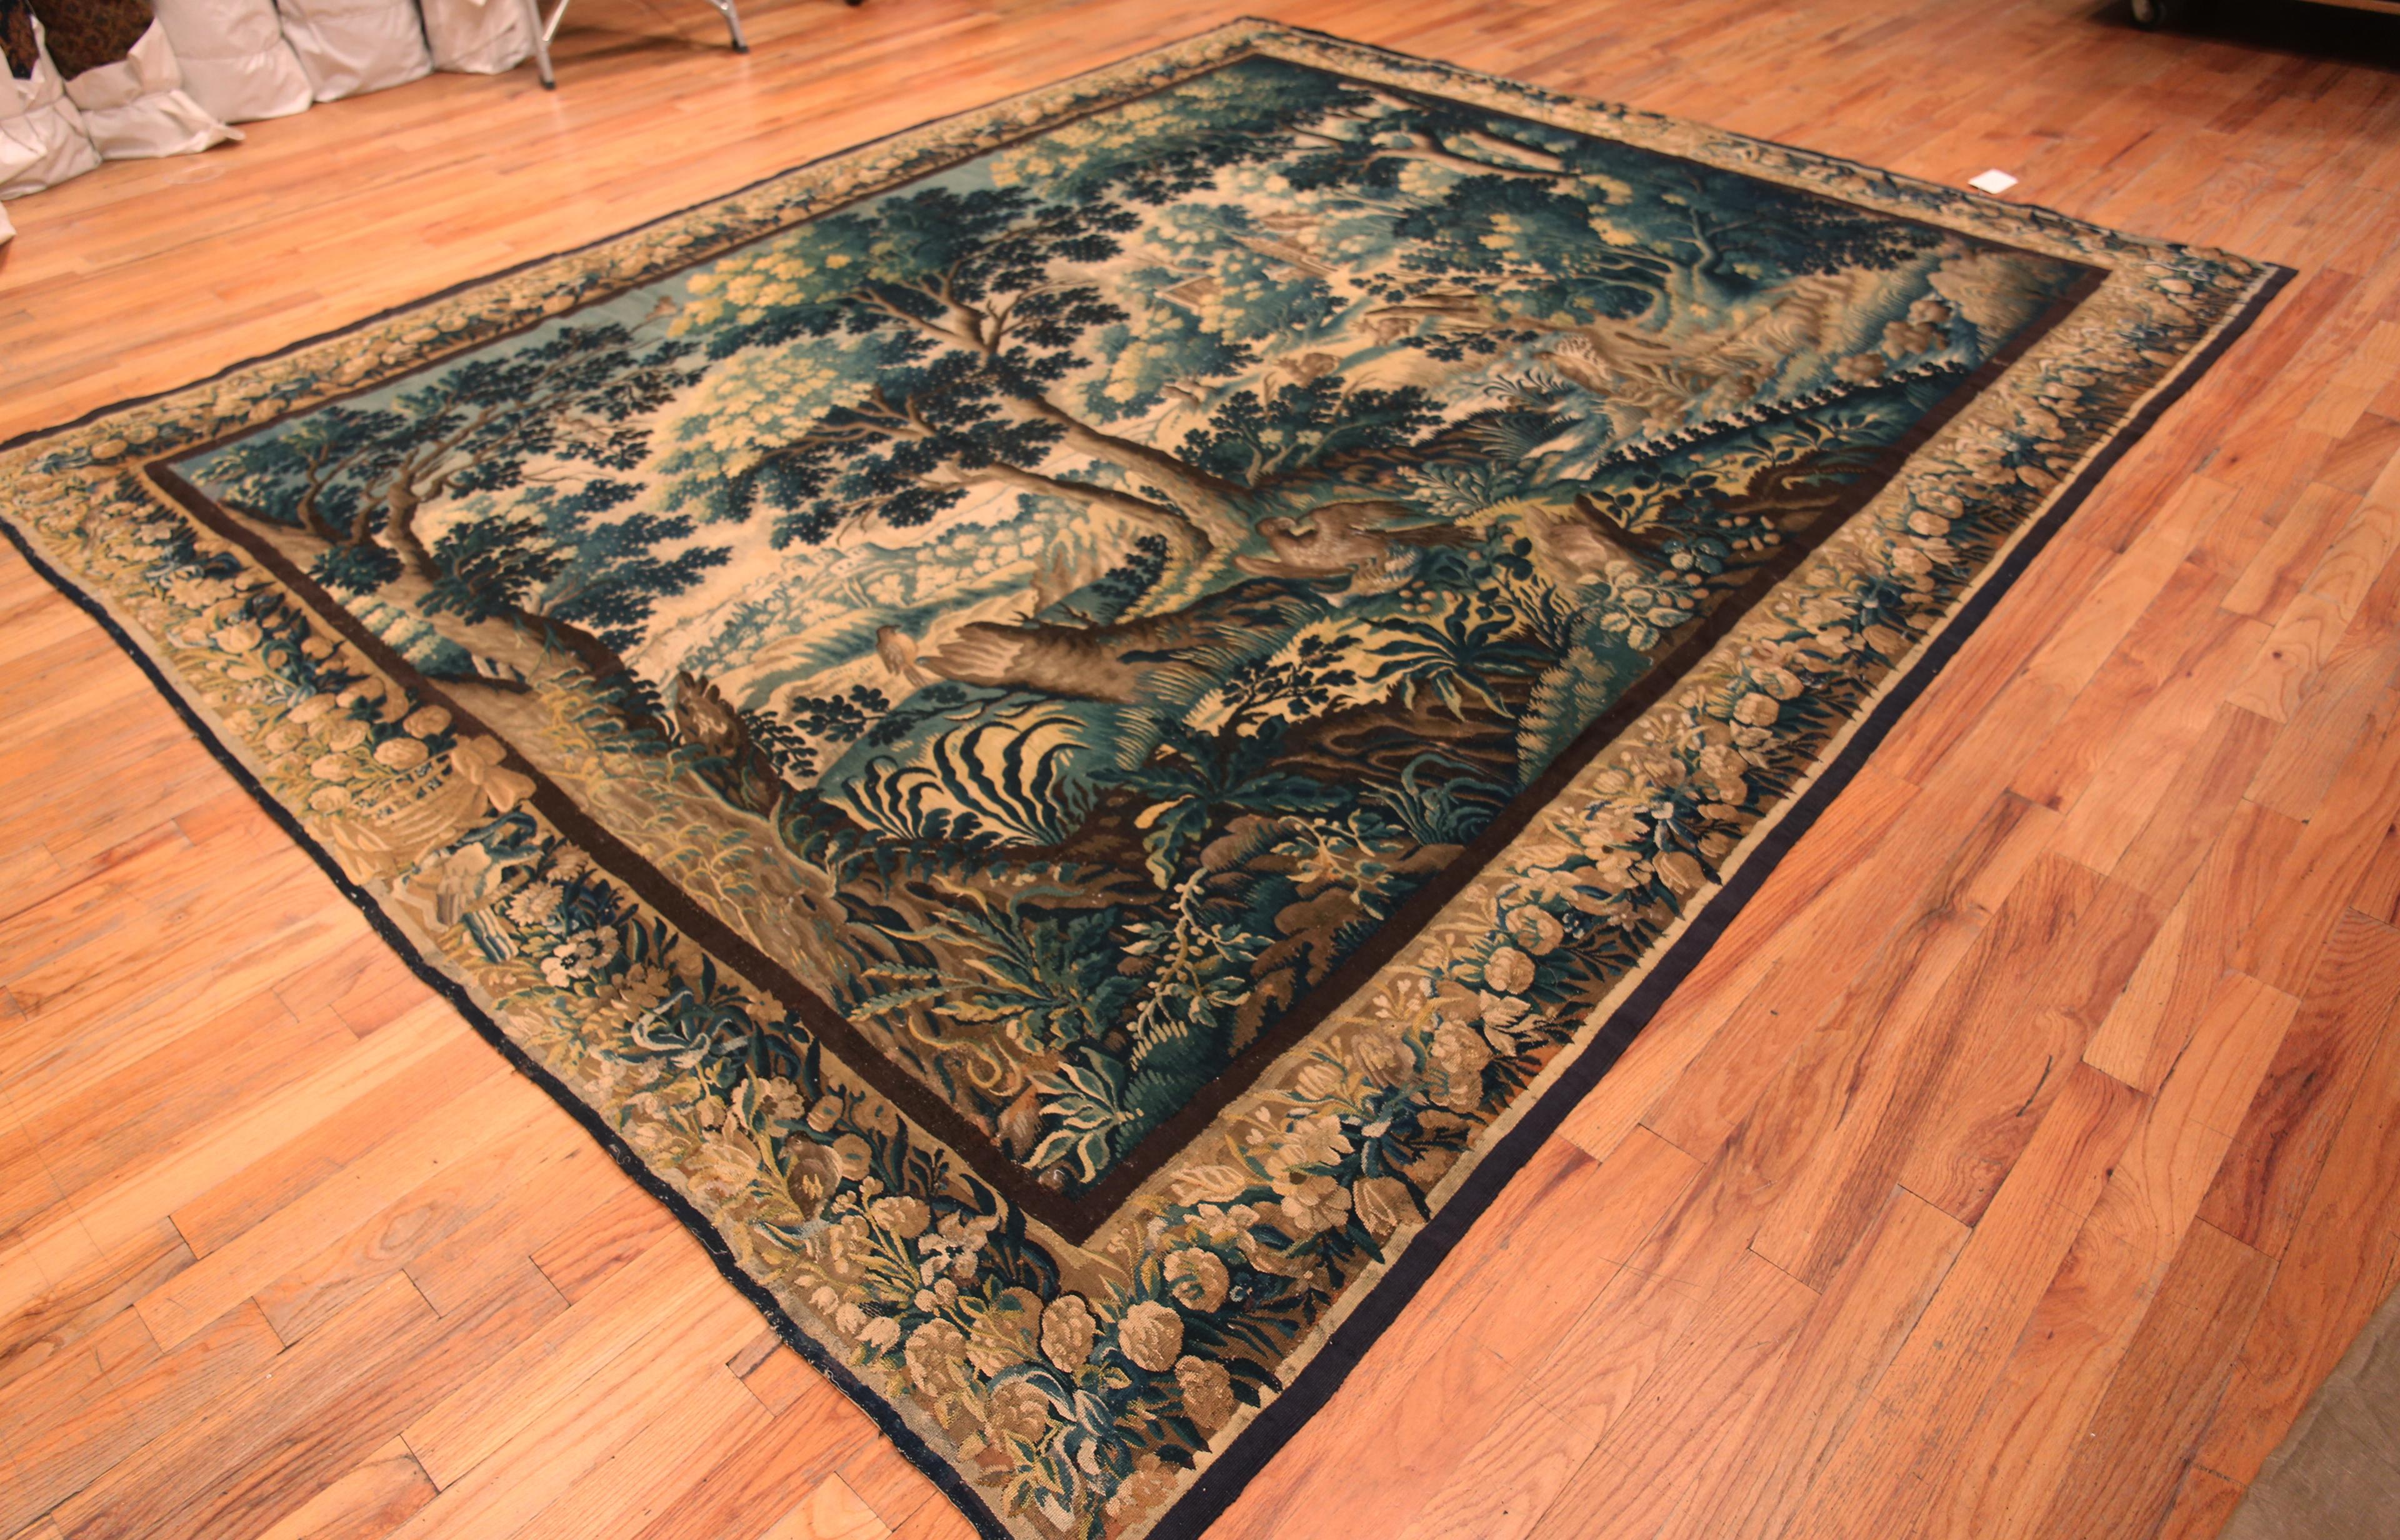 Collectible 17th Century Antique French Silk Verdure Tapestry 10' x 12'5